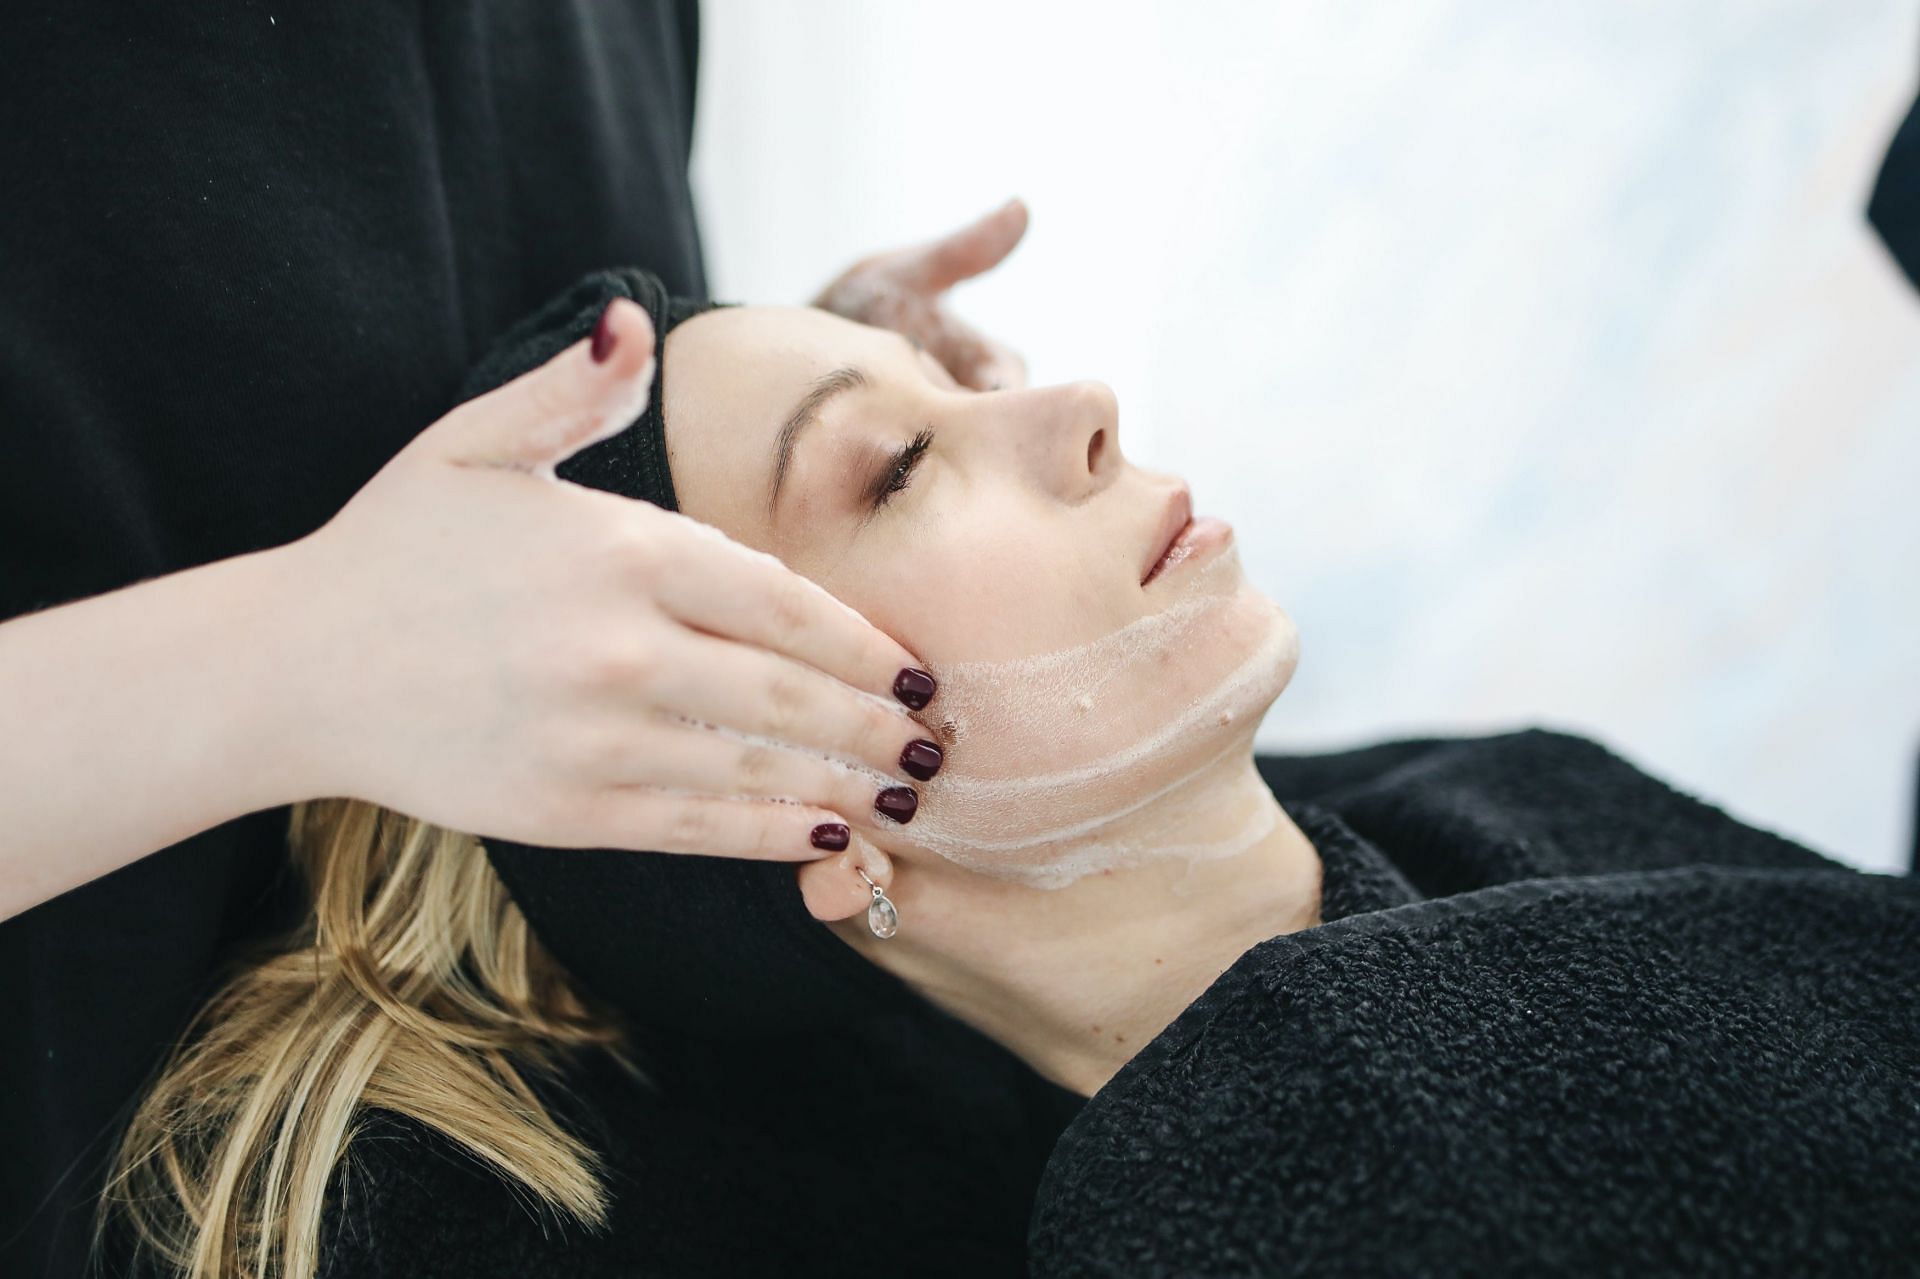 Amazing buccal massage benefits for skin (image sourced via Pexels / Photo by polina)